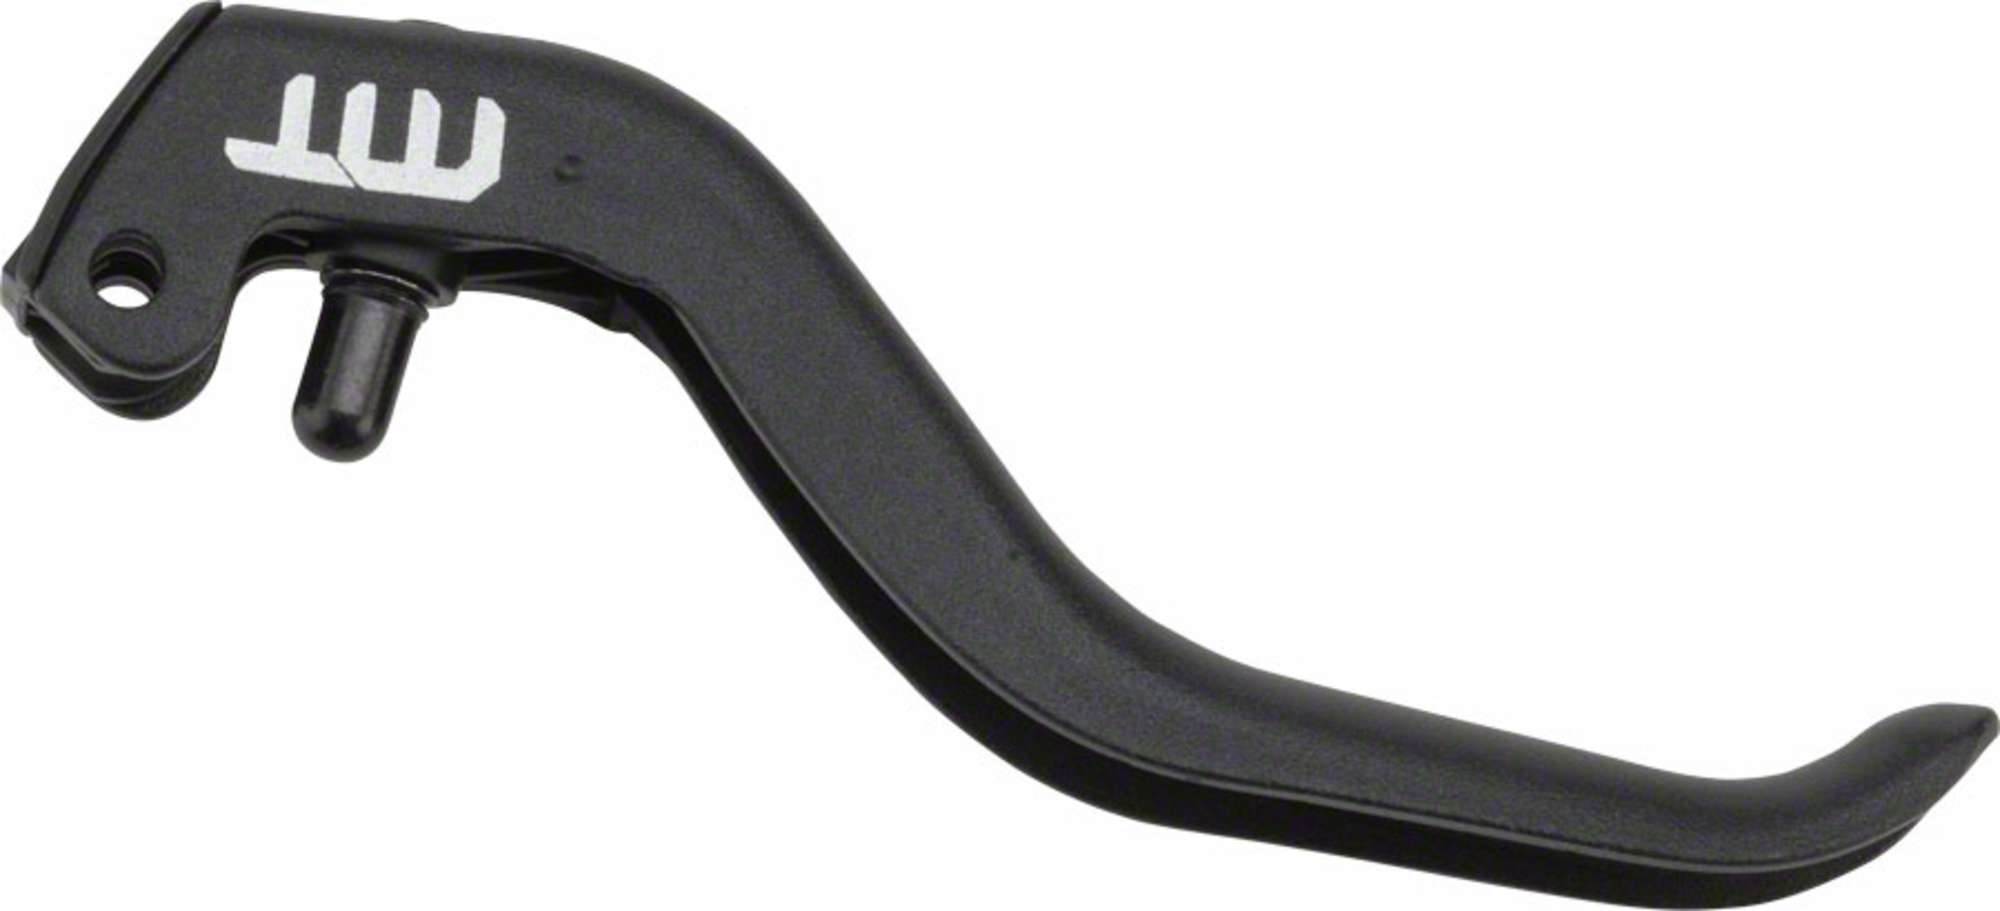 https://www.sefiles.net/images/library/zoom/magura-magura-mt5-disc-brake-replacement-lever-blade-aluminum-410918-3256074-2.png